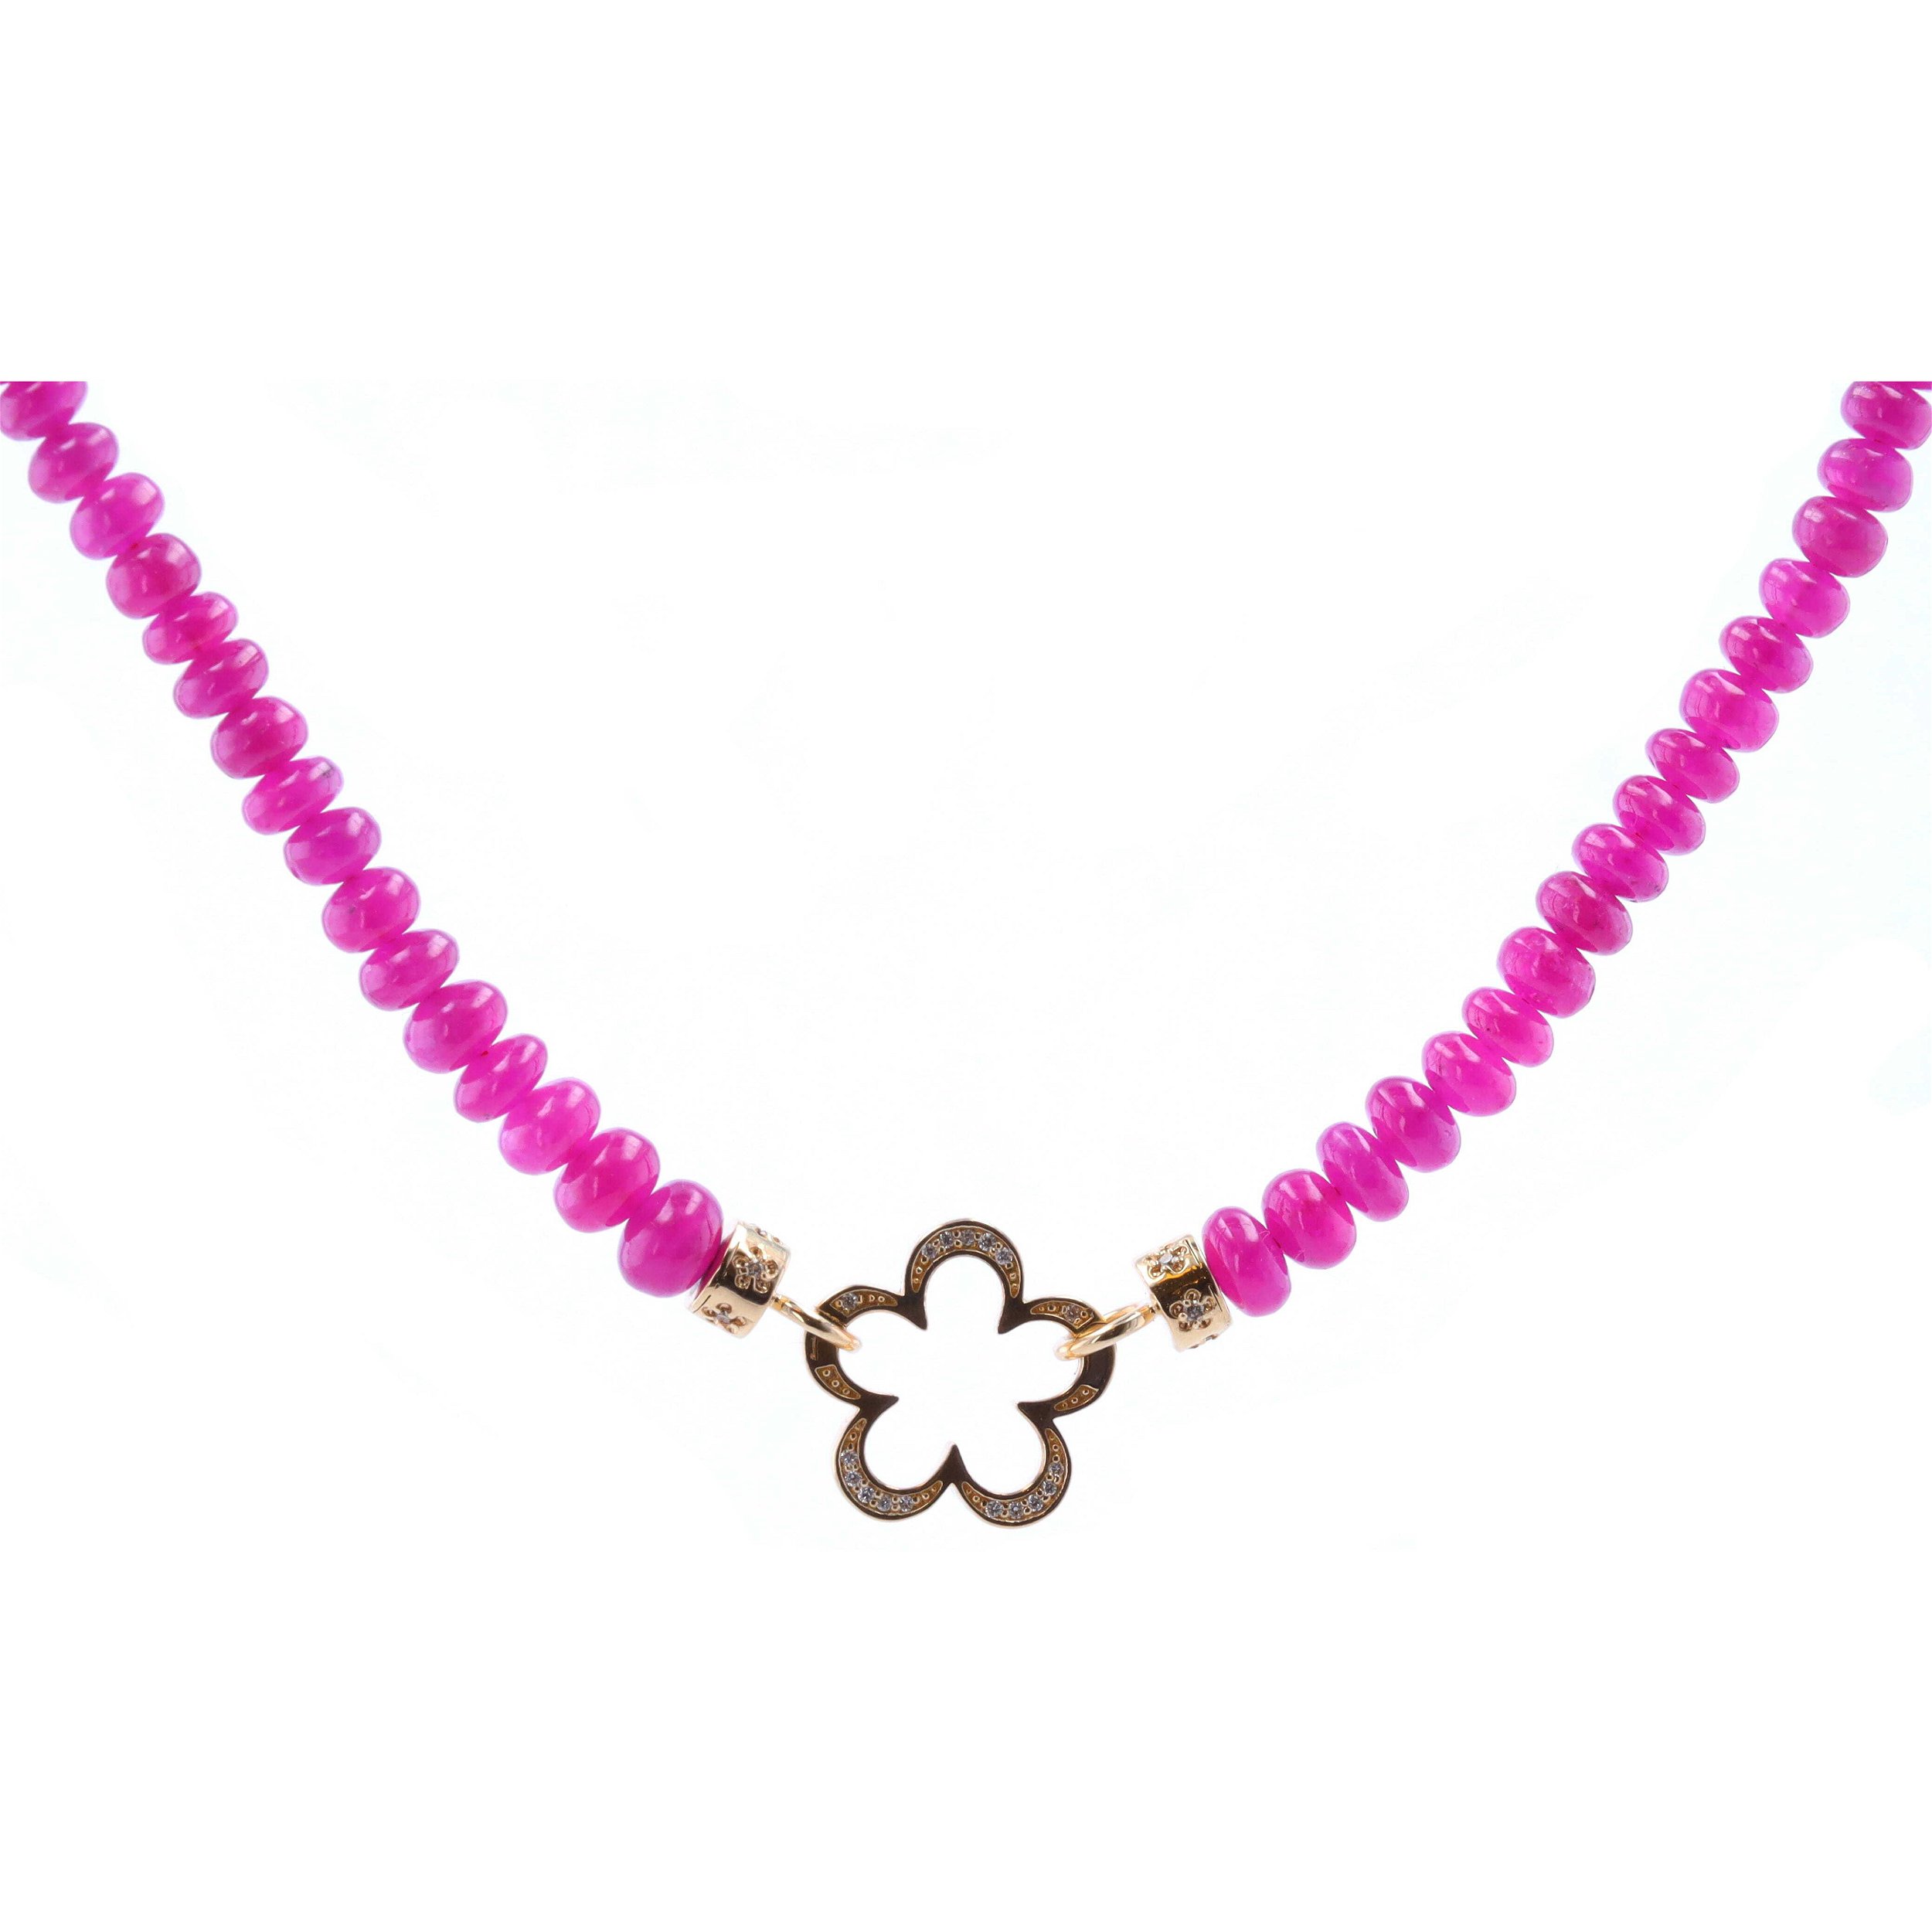 18-20" 4-5mm Hand Polished Pink Tourmaline Beaded Chain With 14k Gold Extension And Gold Caps and Flower